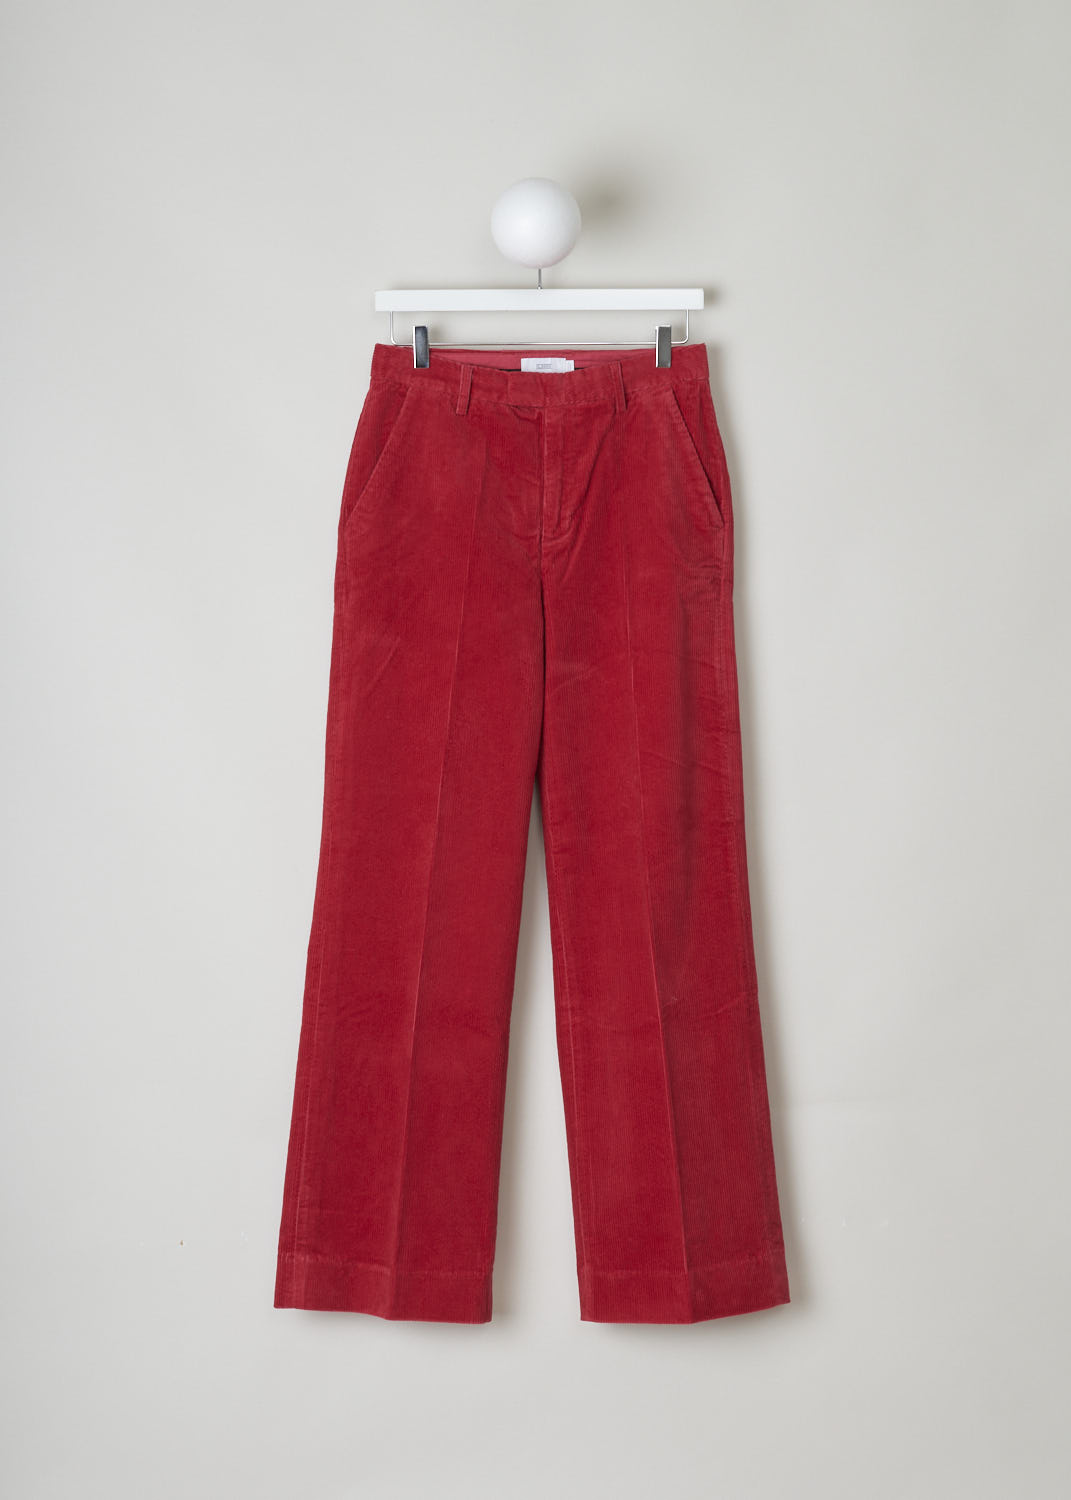 CLOSED, RED RIBBED TROUSERS, C91265_38W_20895, Red, Front, Bright red corduroy trousers with belt loops and concealed zip and double clasp closure. These trousers have slanted pockets in the front and a single welt pocket with button in the back. This model has straight pant legs. 
